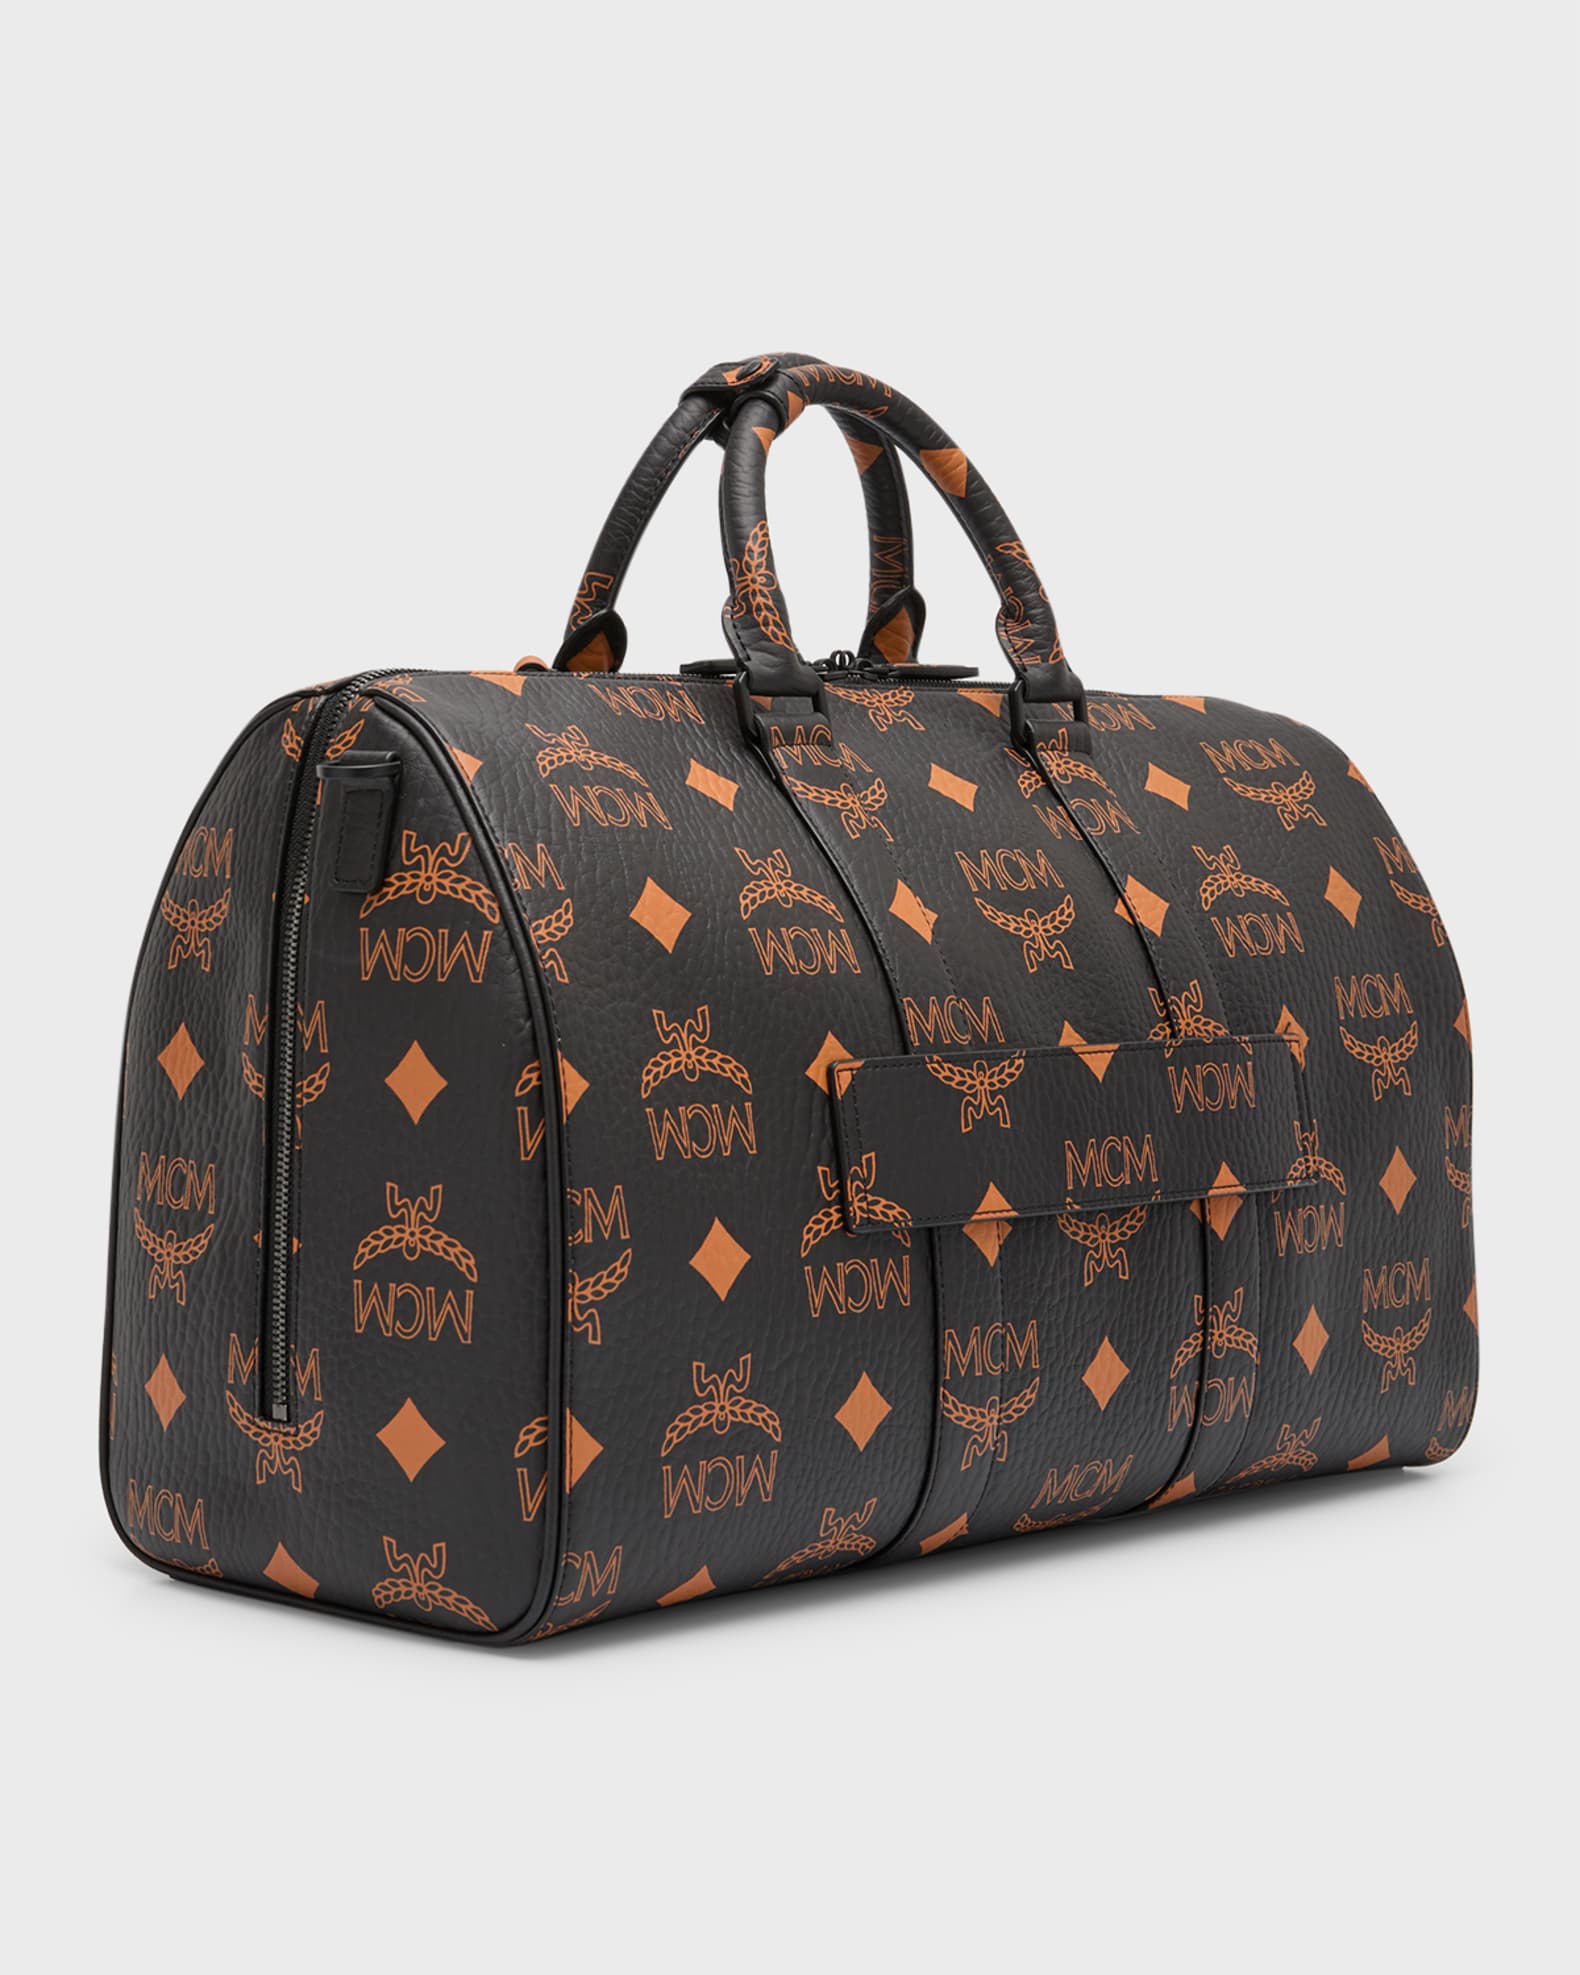 Search for a Louis Vuitton Duffle Bag any one know a seller? : r/DHgate